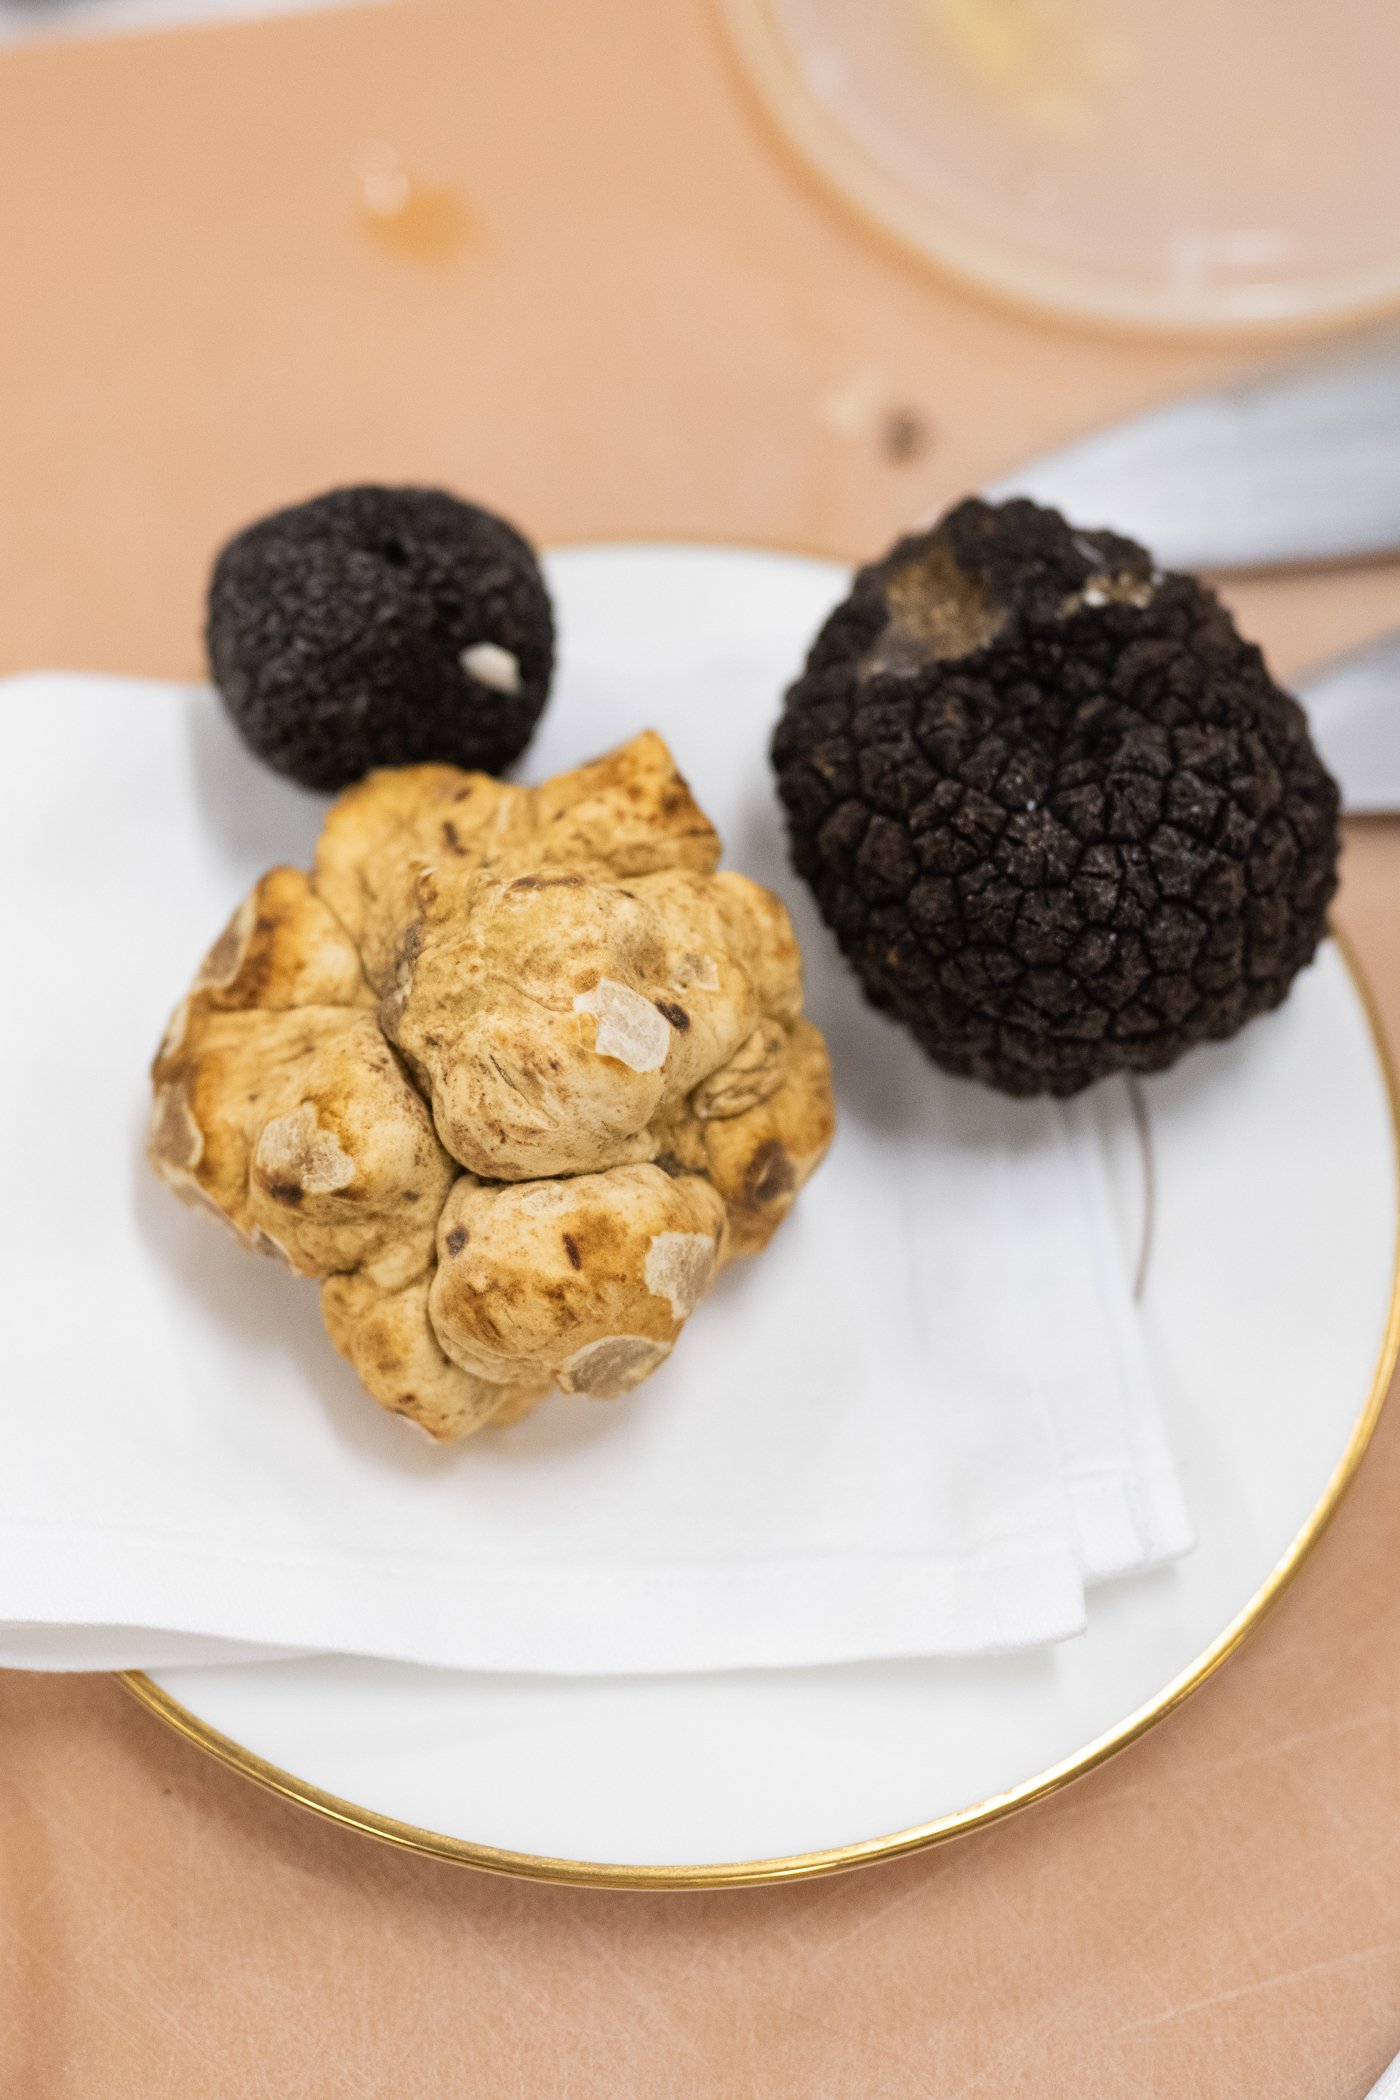 Charleston event photographer Reese Moore covered a special truffle dinner at the Charleston Place Hotel